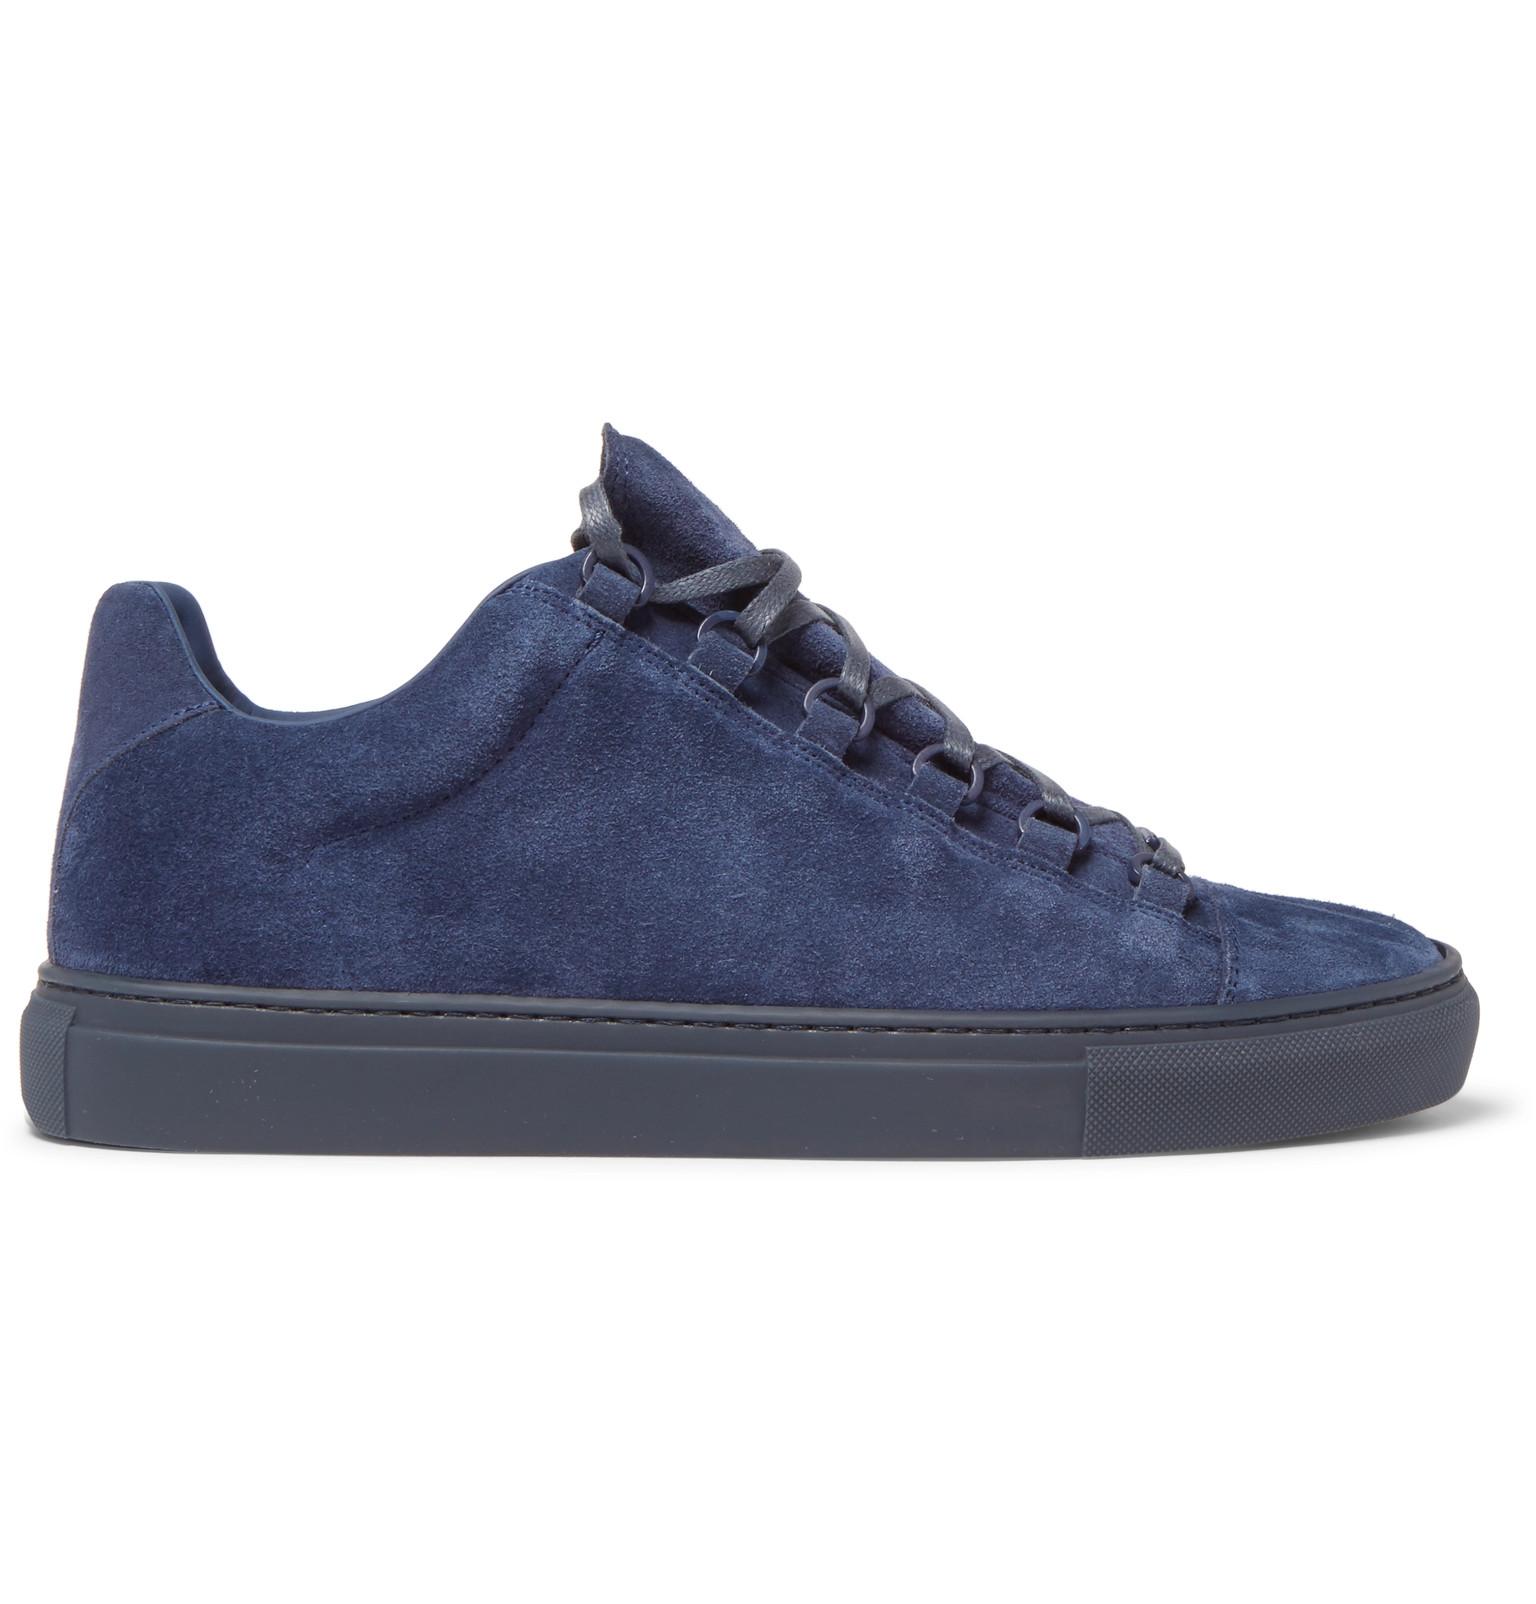 Balenciaga Arena Suede Sneakers in Navy (Blue) for Men - Lyst